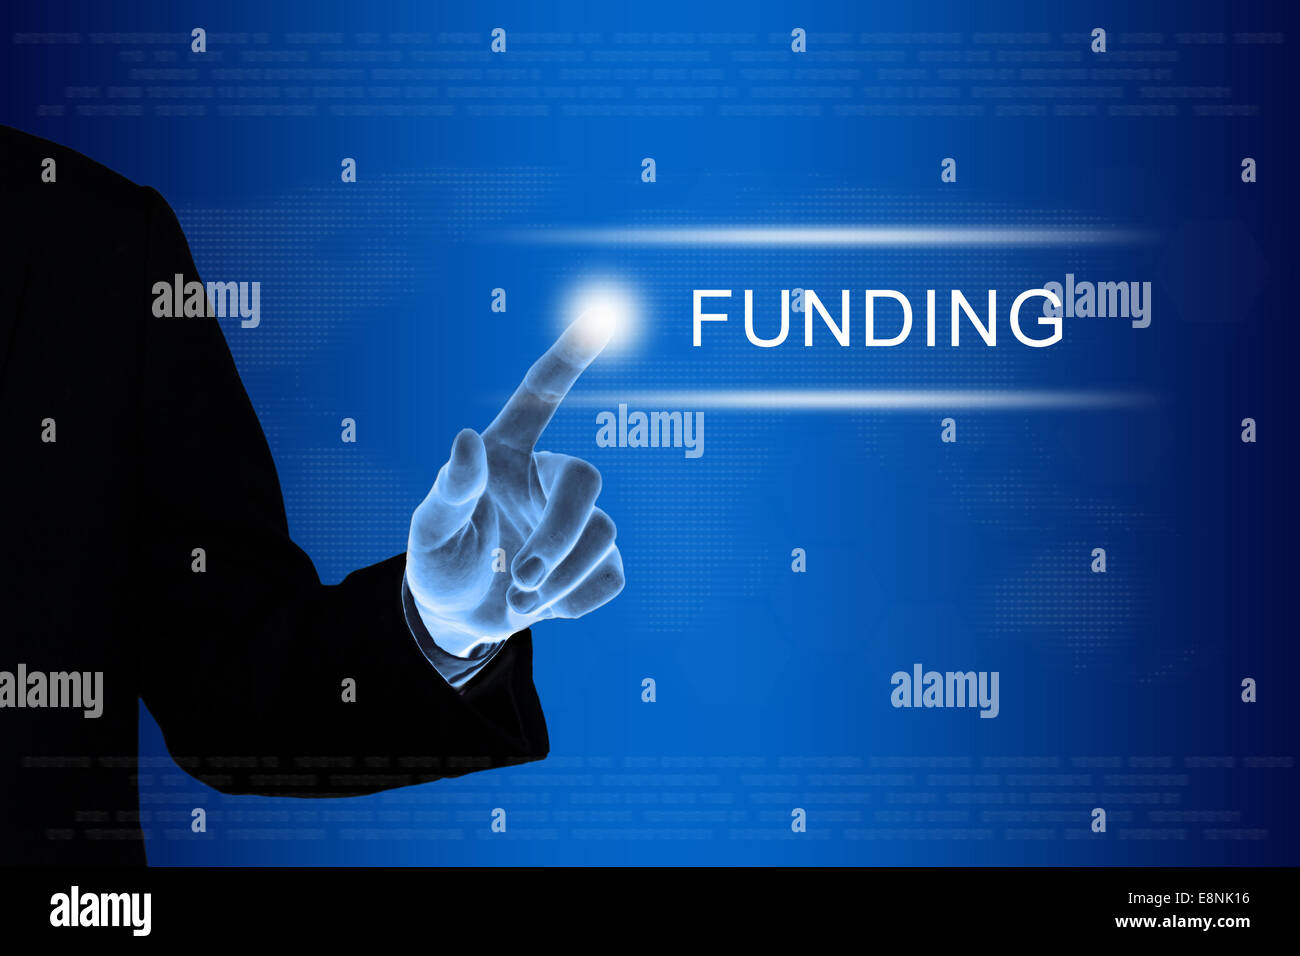 business hand pushing financial funding button on a touch screen interface Stock Photo